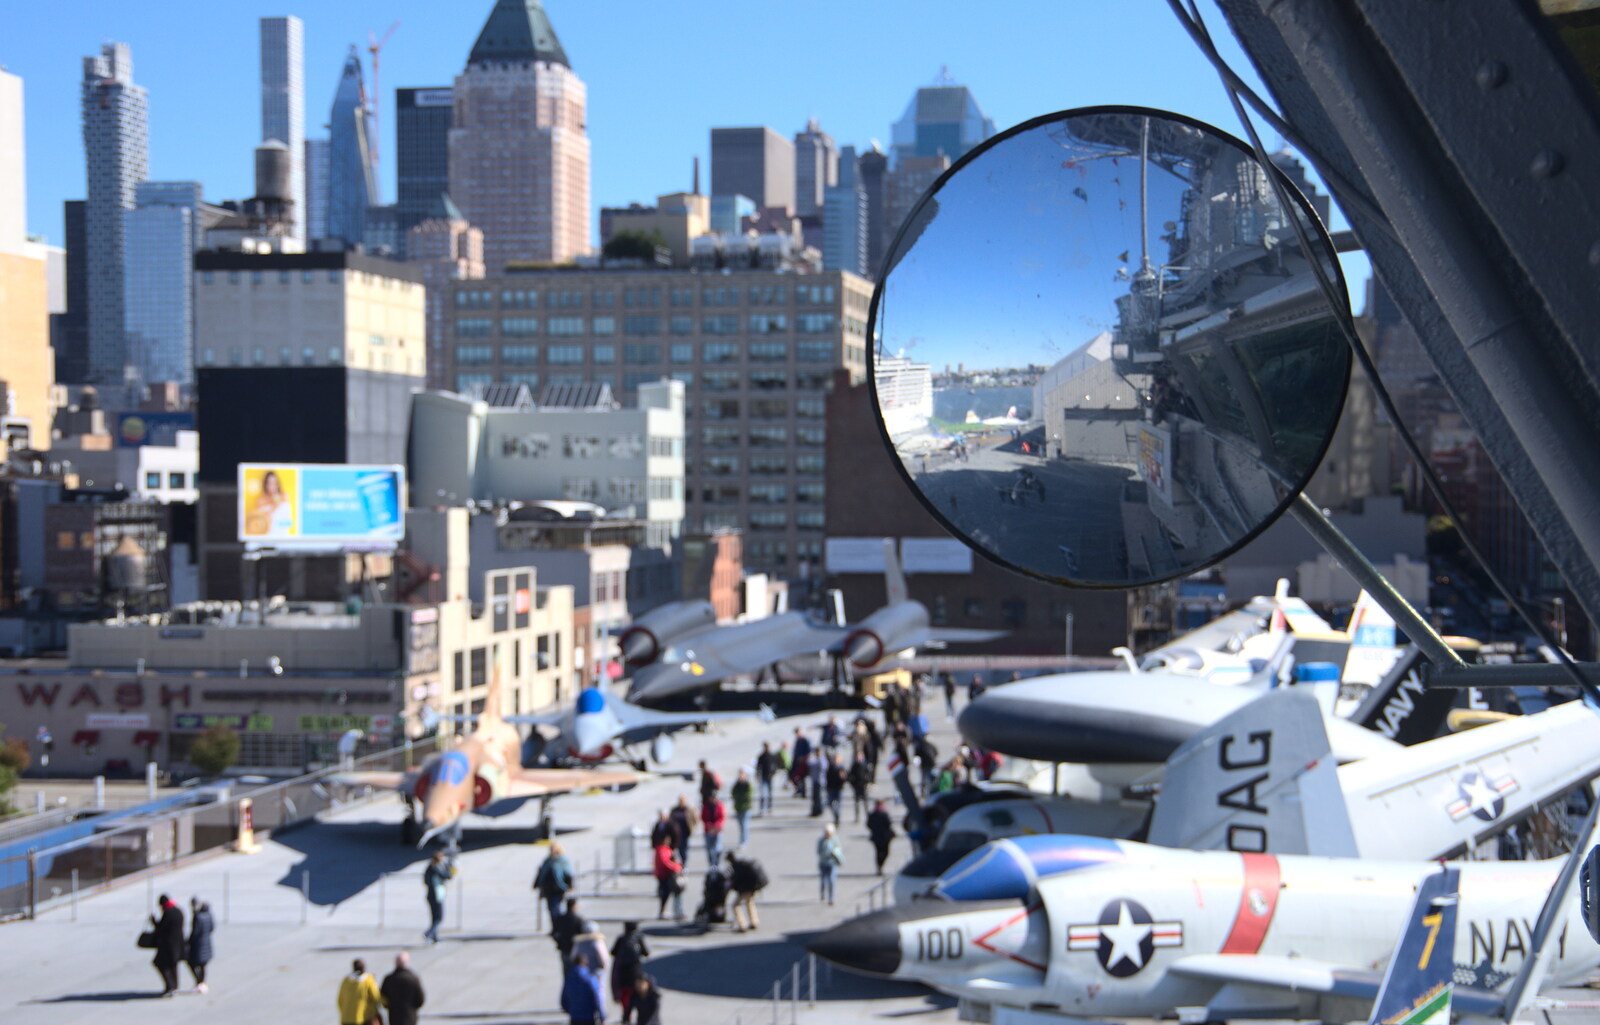 Even massive aircraft carriers need wing mirrors from Times Square, USS Intrepid and the High Line, Manhattan, New York - 25th October 2018